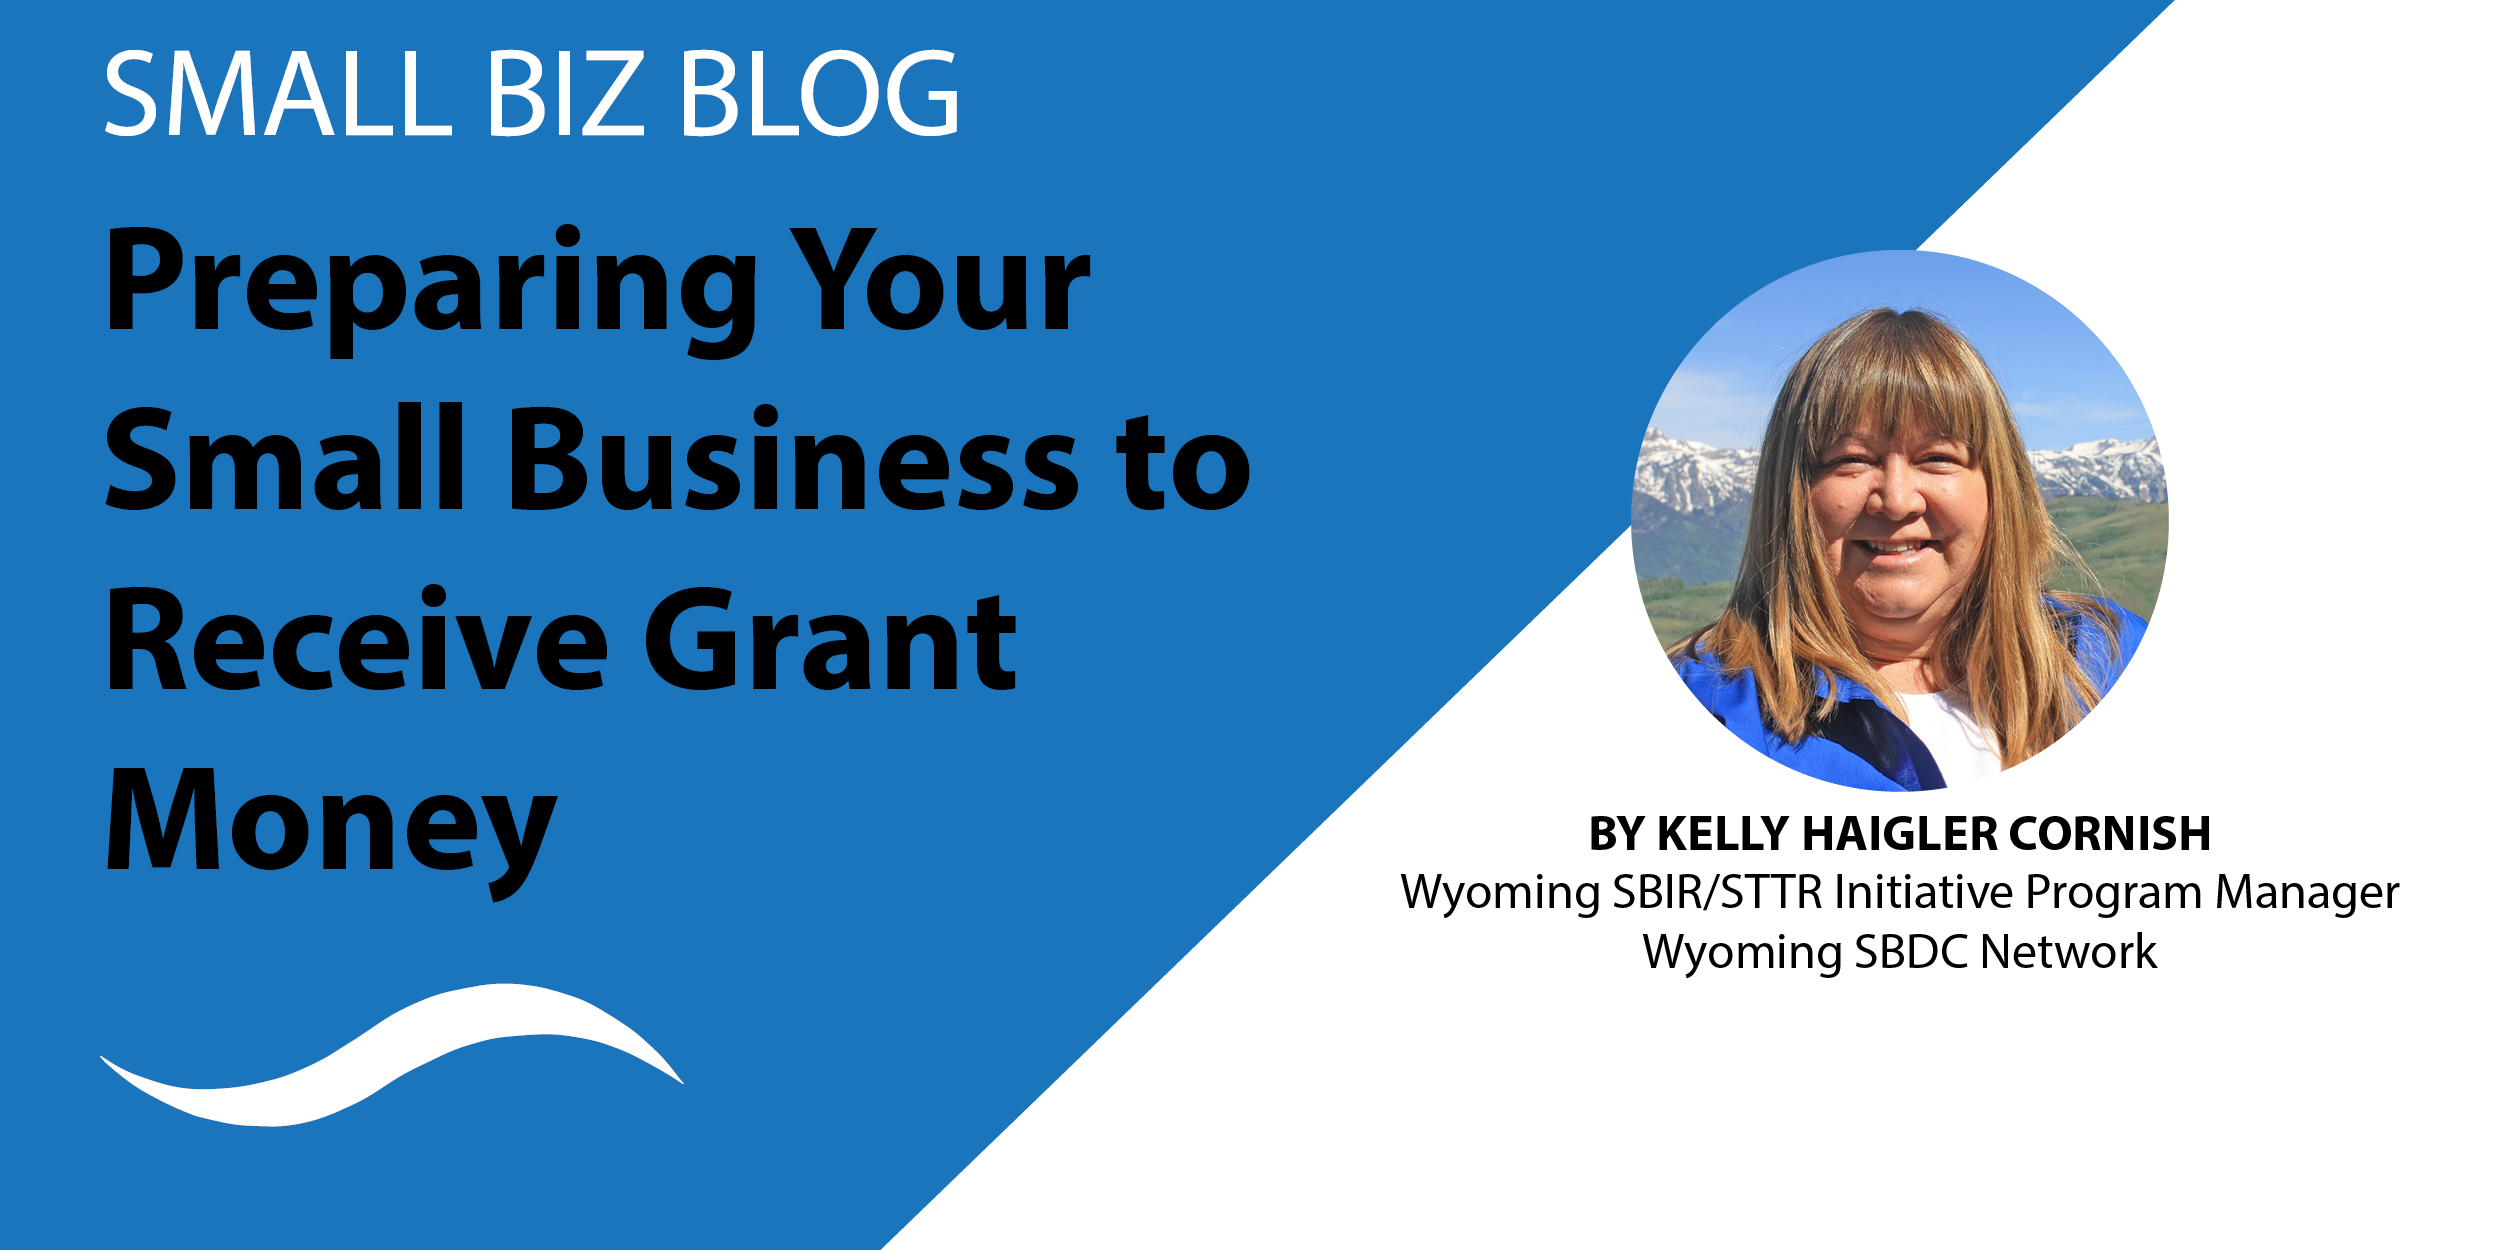 Preparing Your Small Business to Receive Grant Money